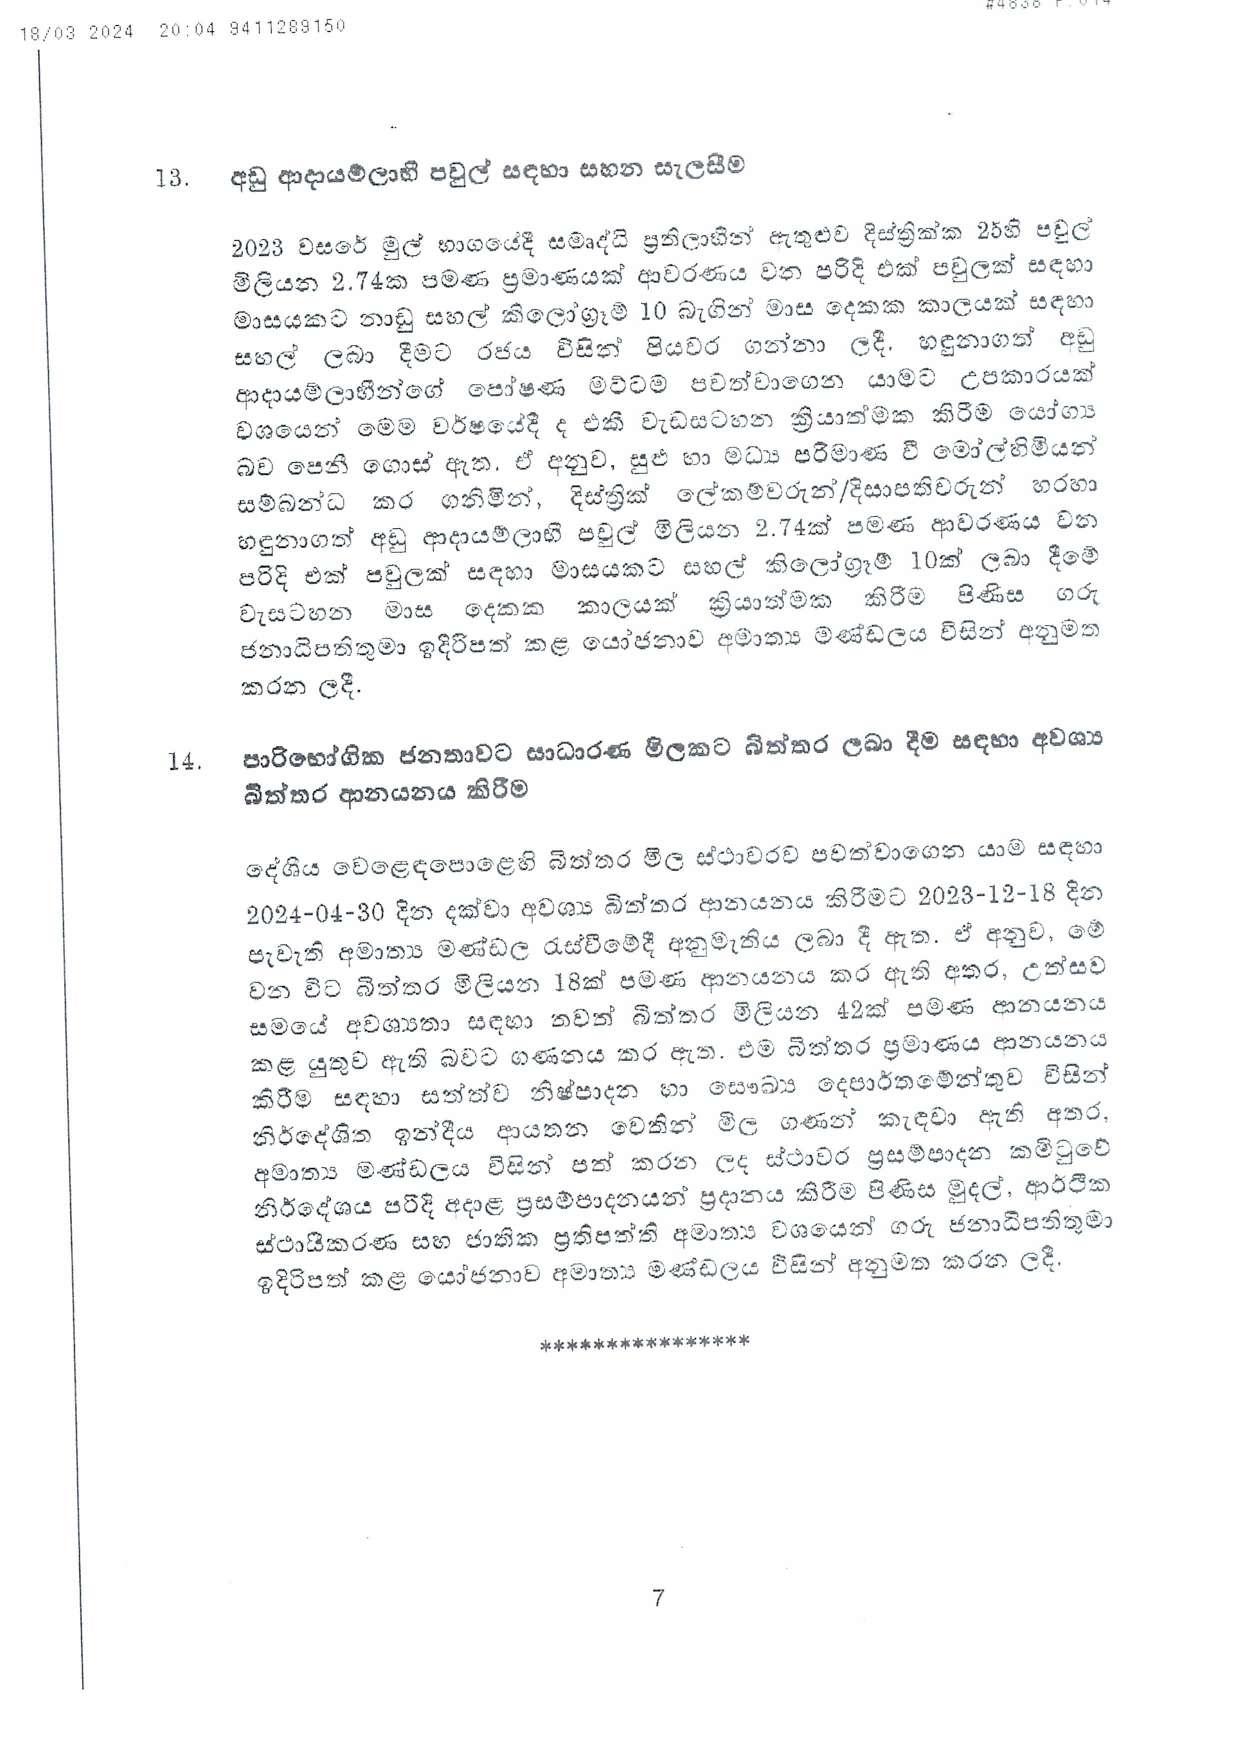 Cabinet Decisions on 18.03.2024 page 007